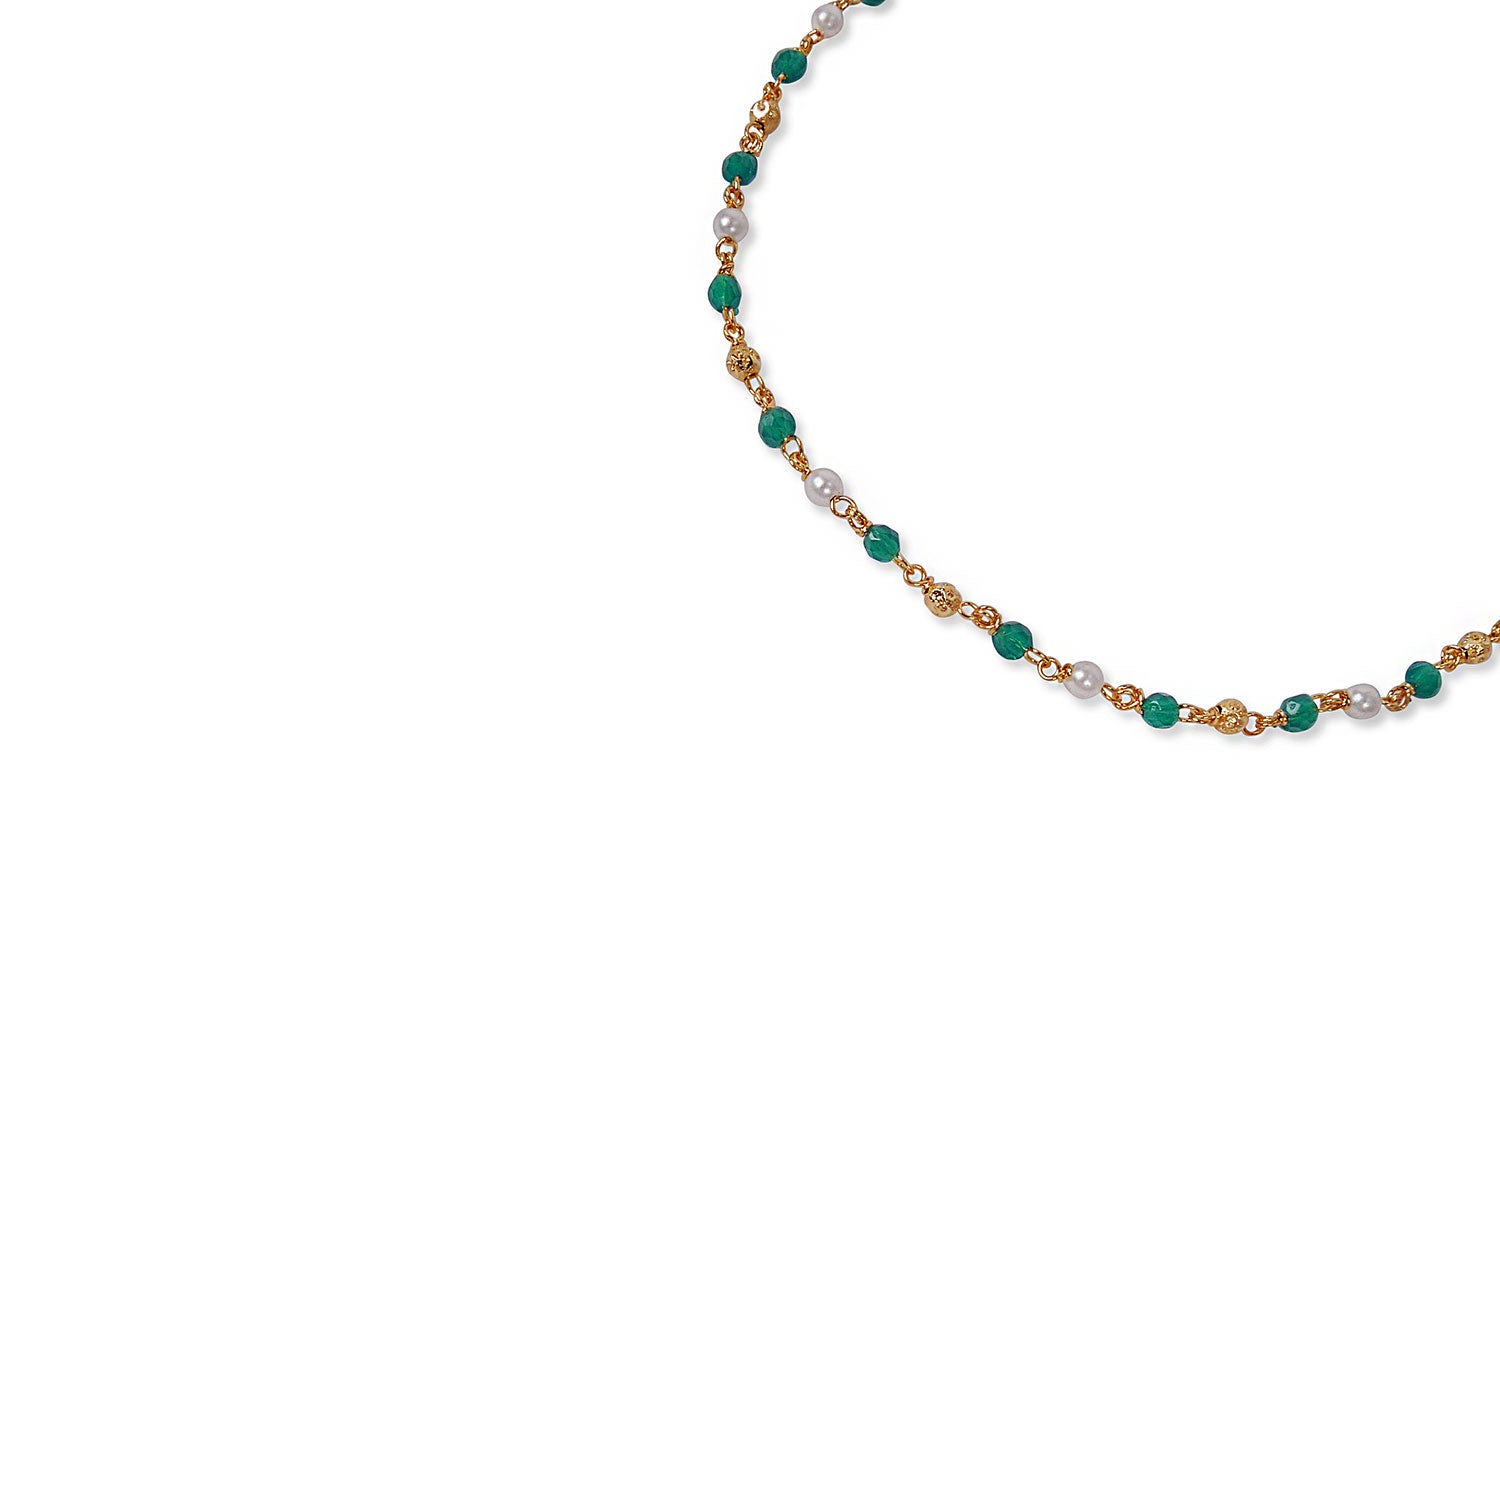 Cora Beaded Anklet in Green